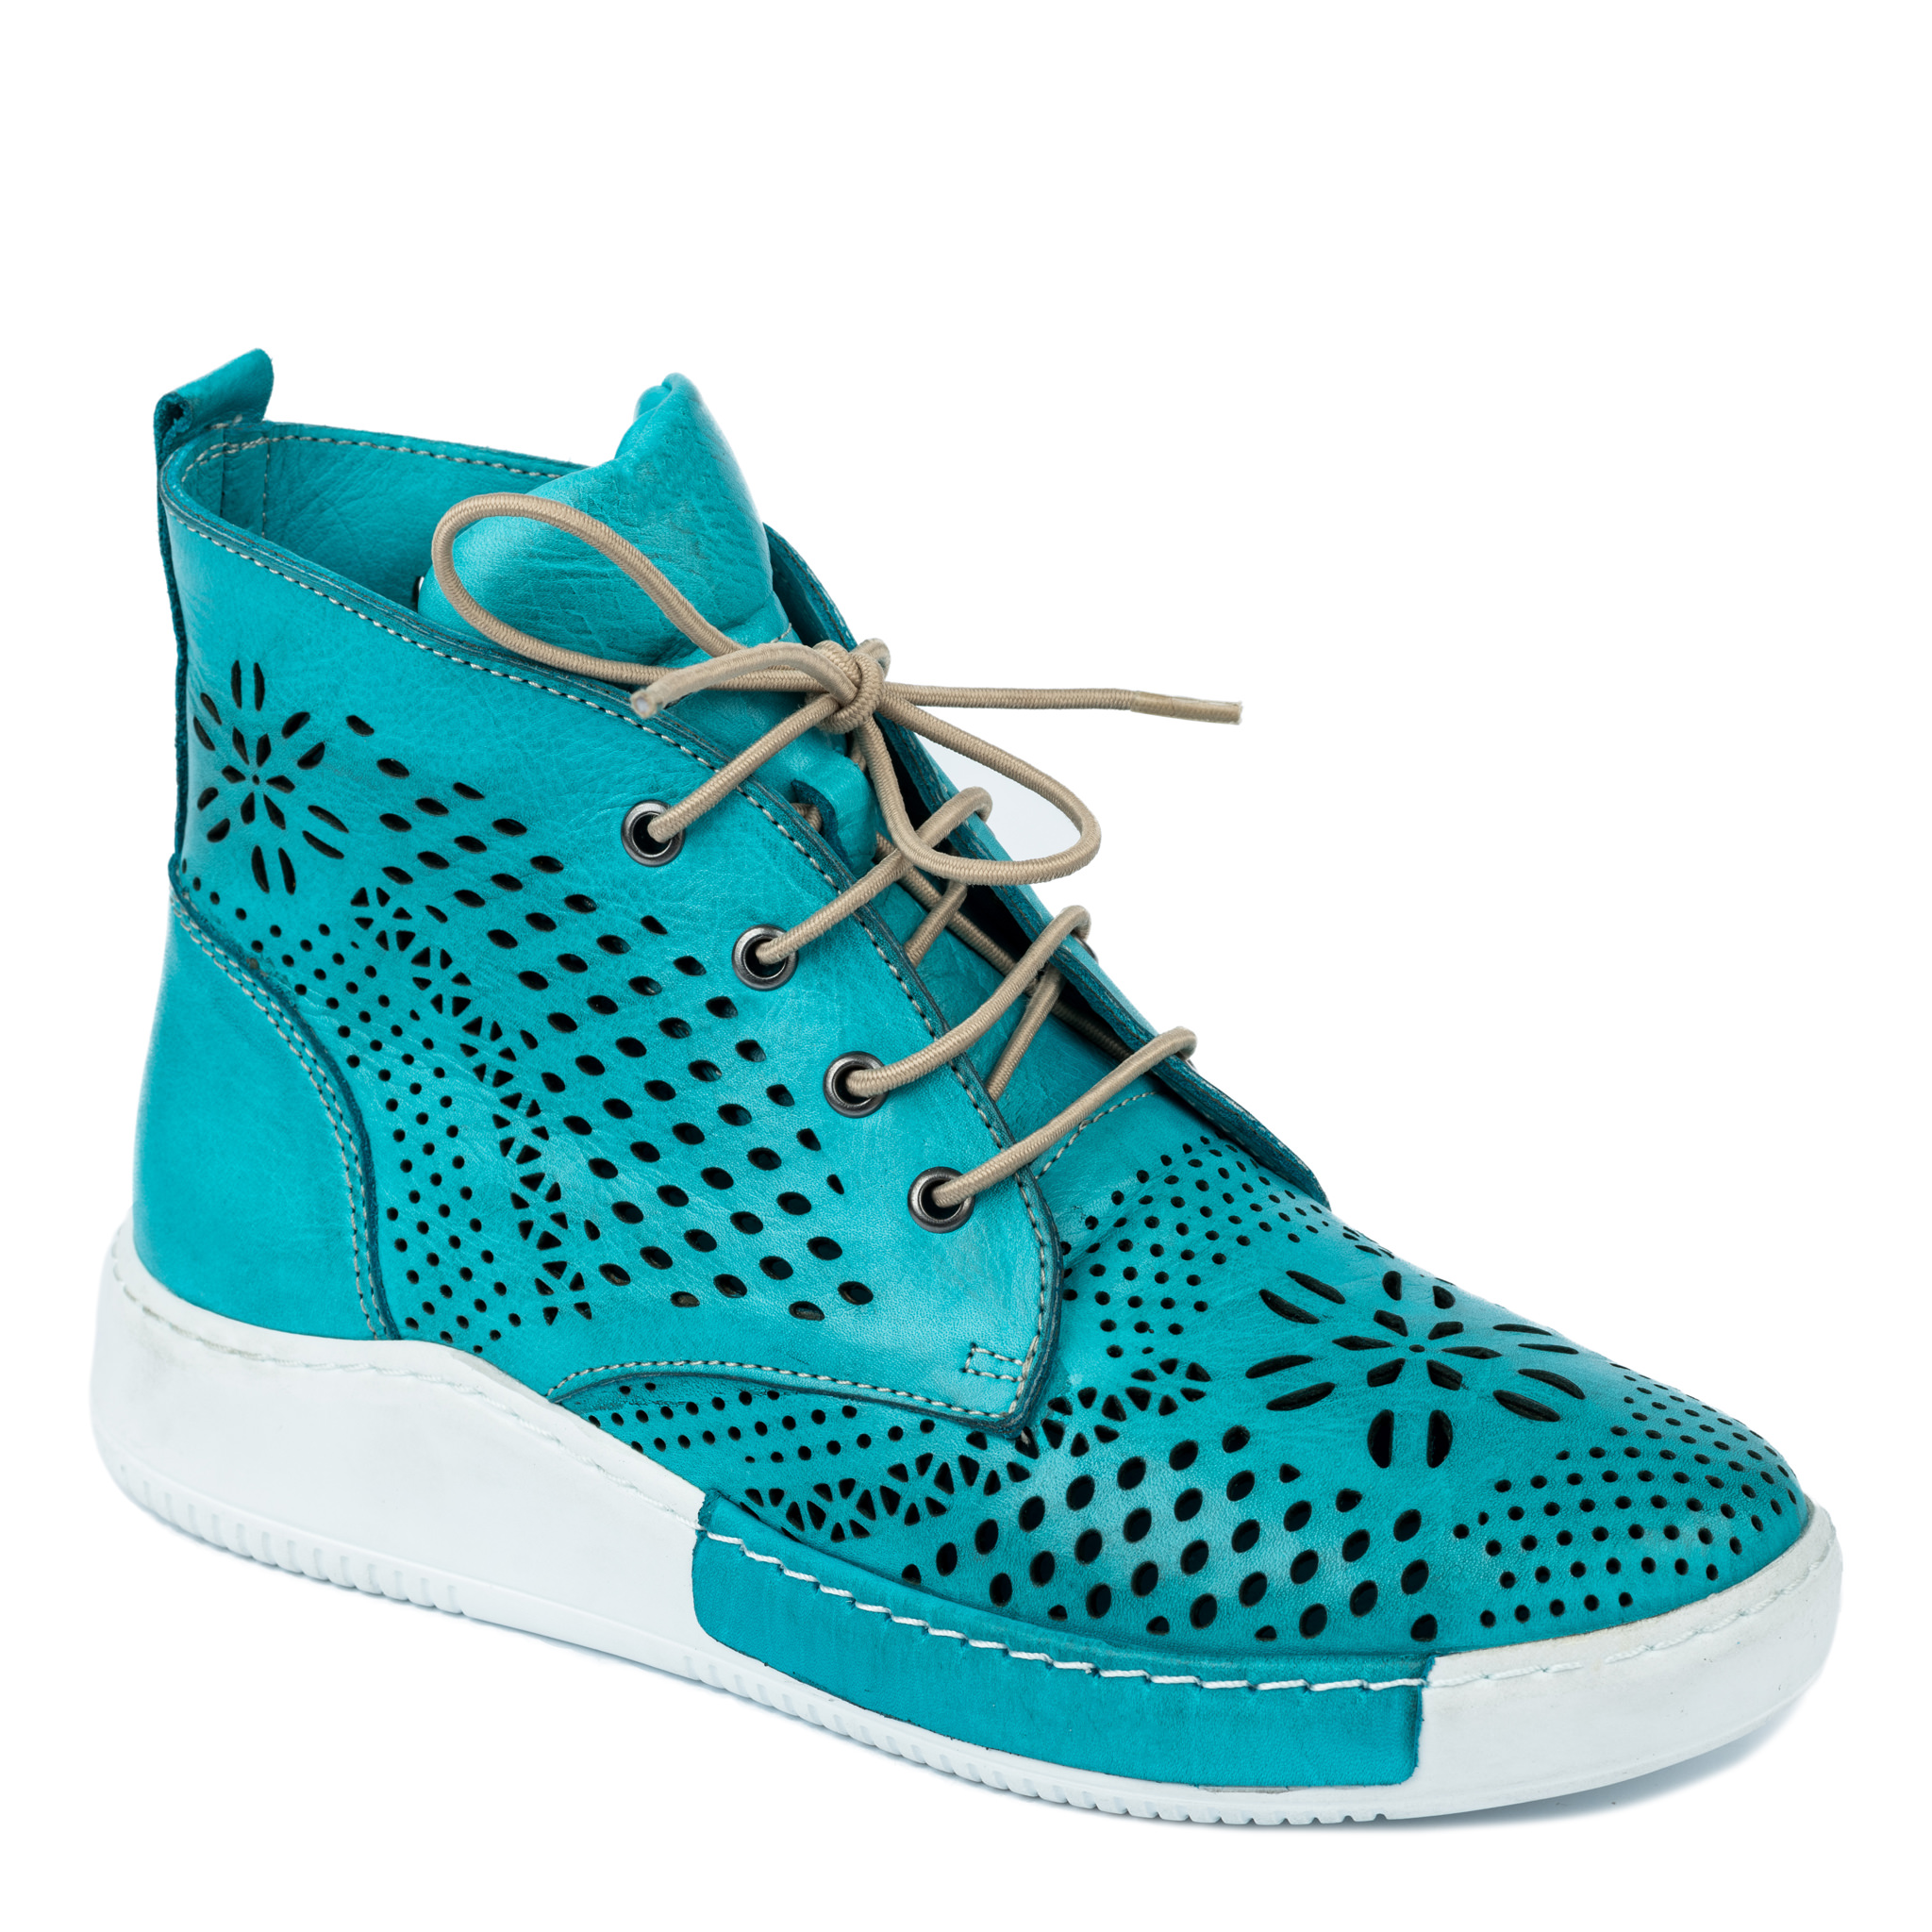 Women sneakers A234 - TURQUOISE